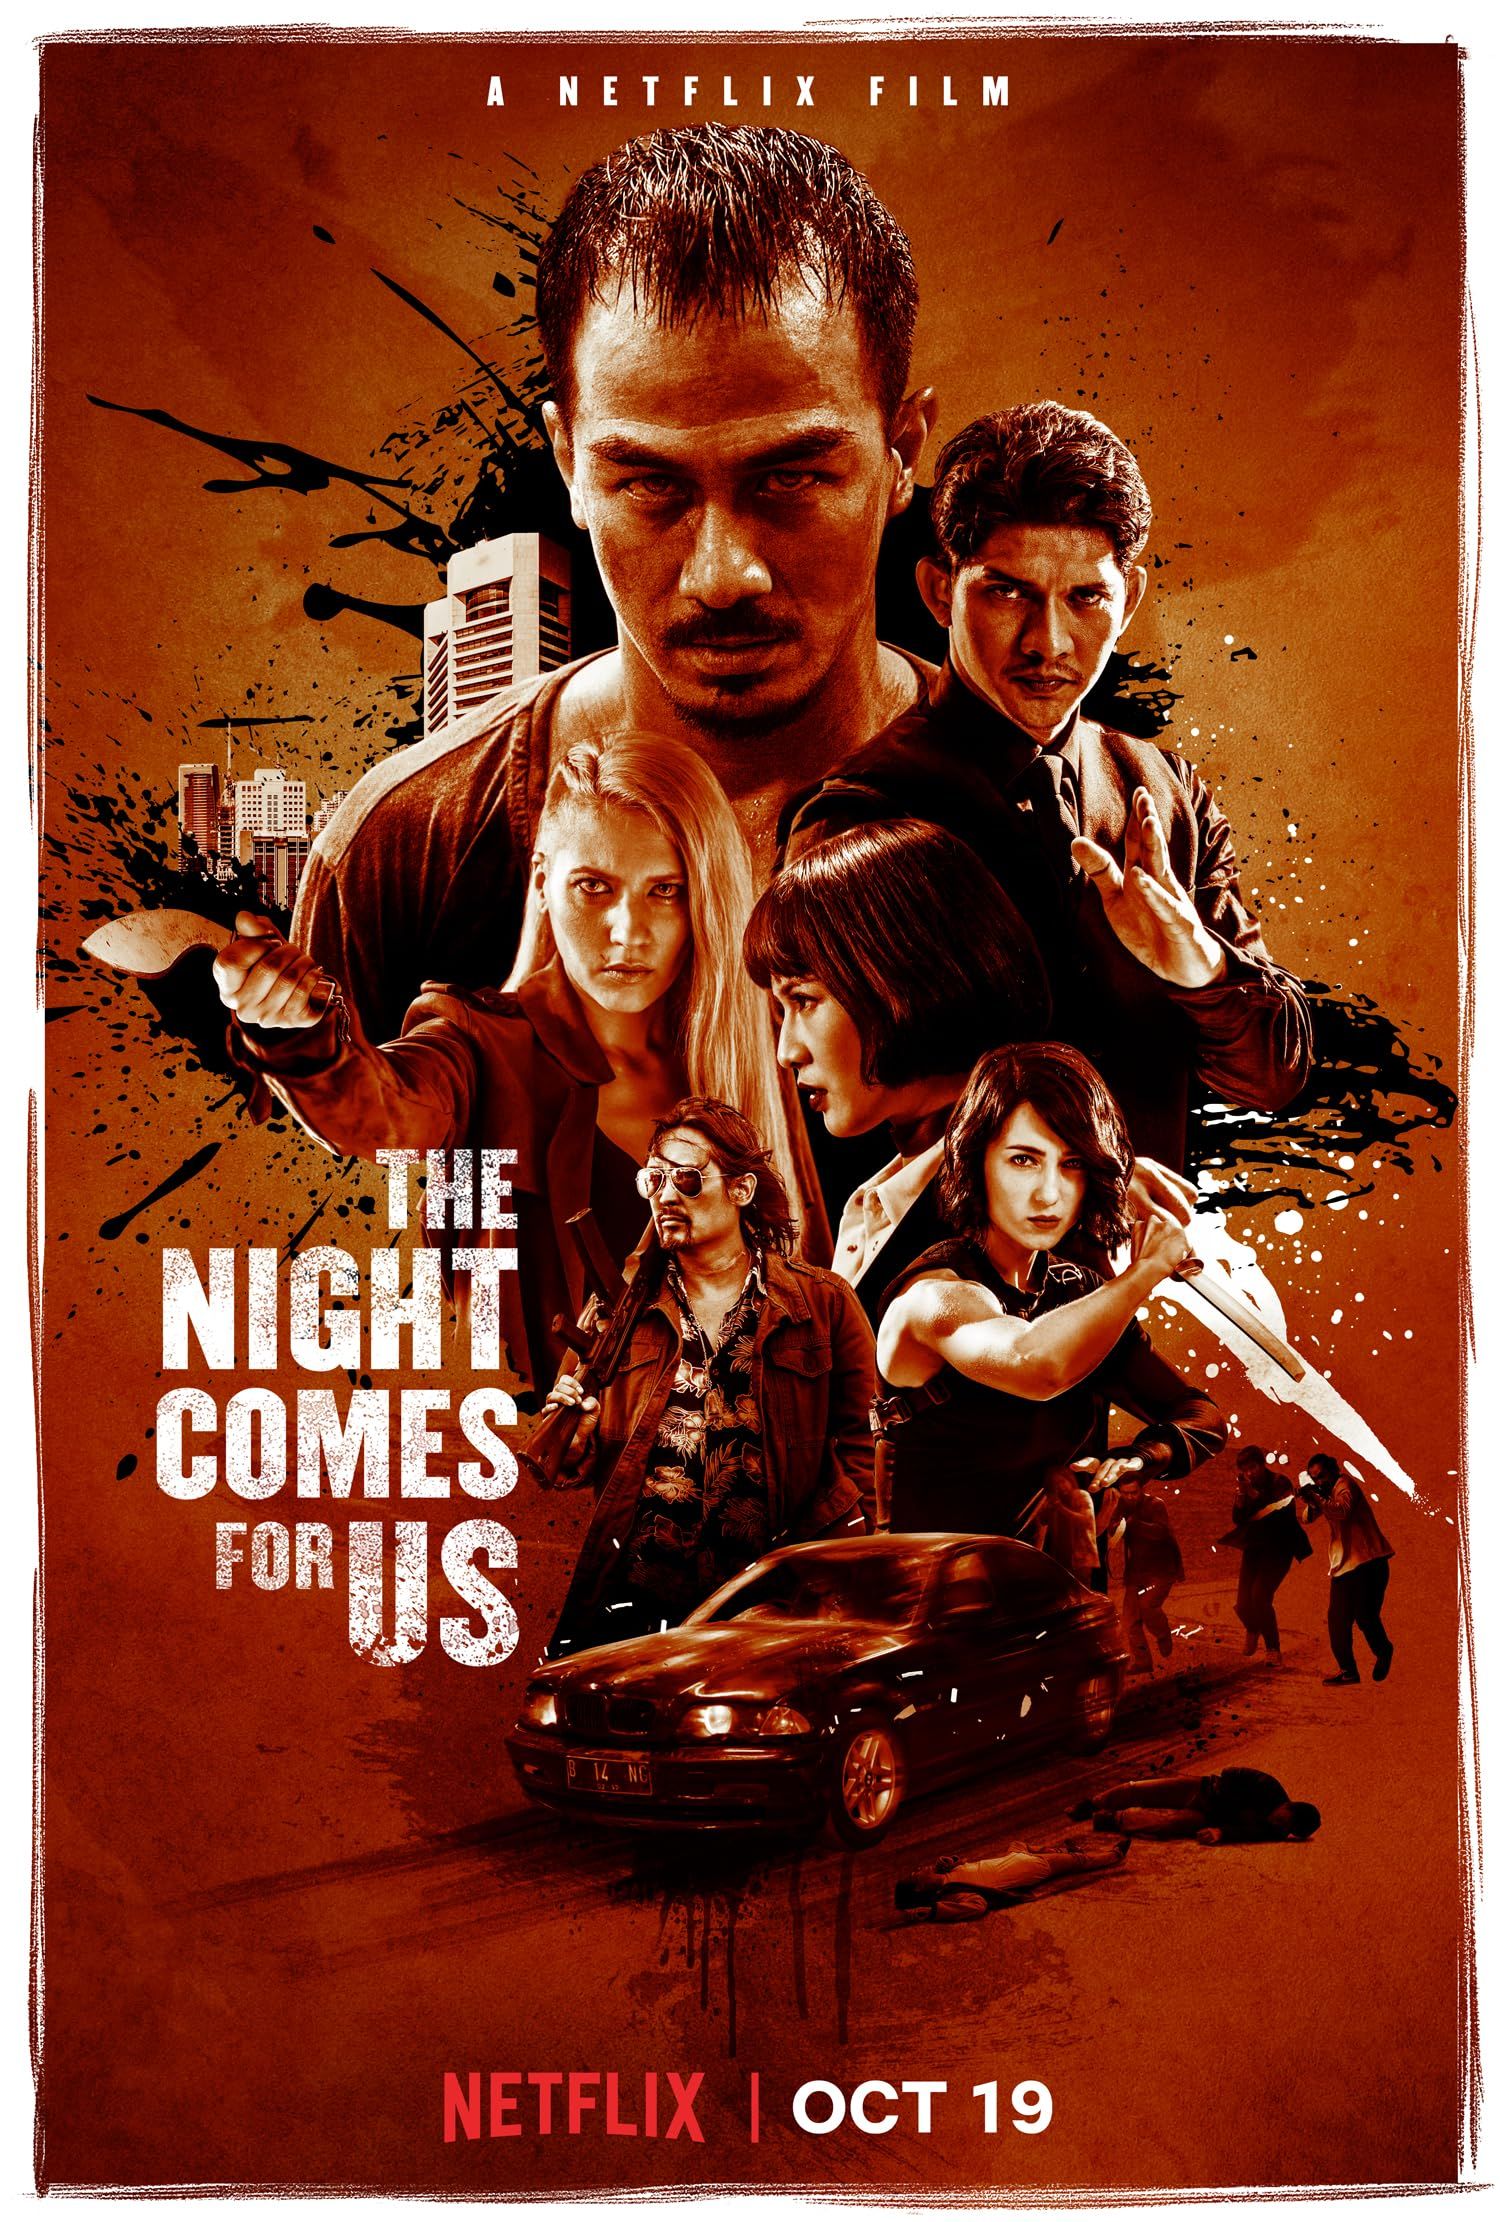 The Night Comes for Us (2018) Hindi Dubbed ORG BluRay Full Movie 720p 480p